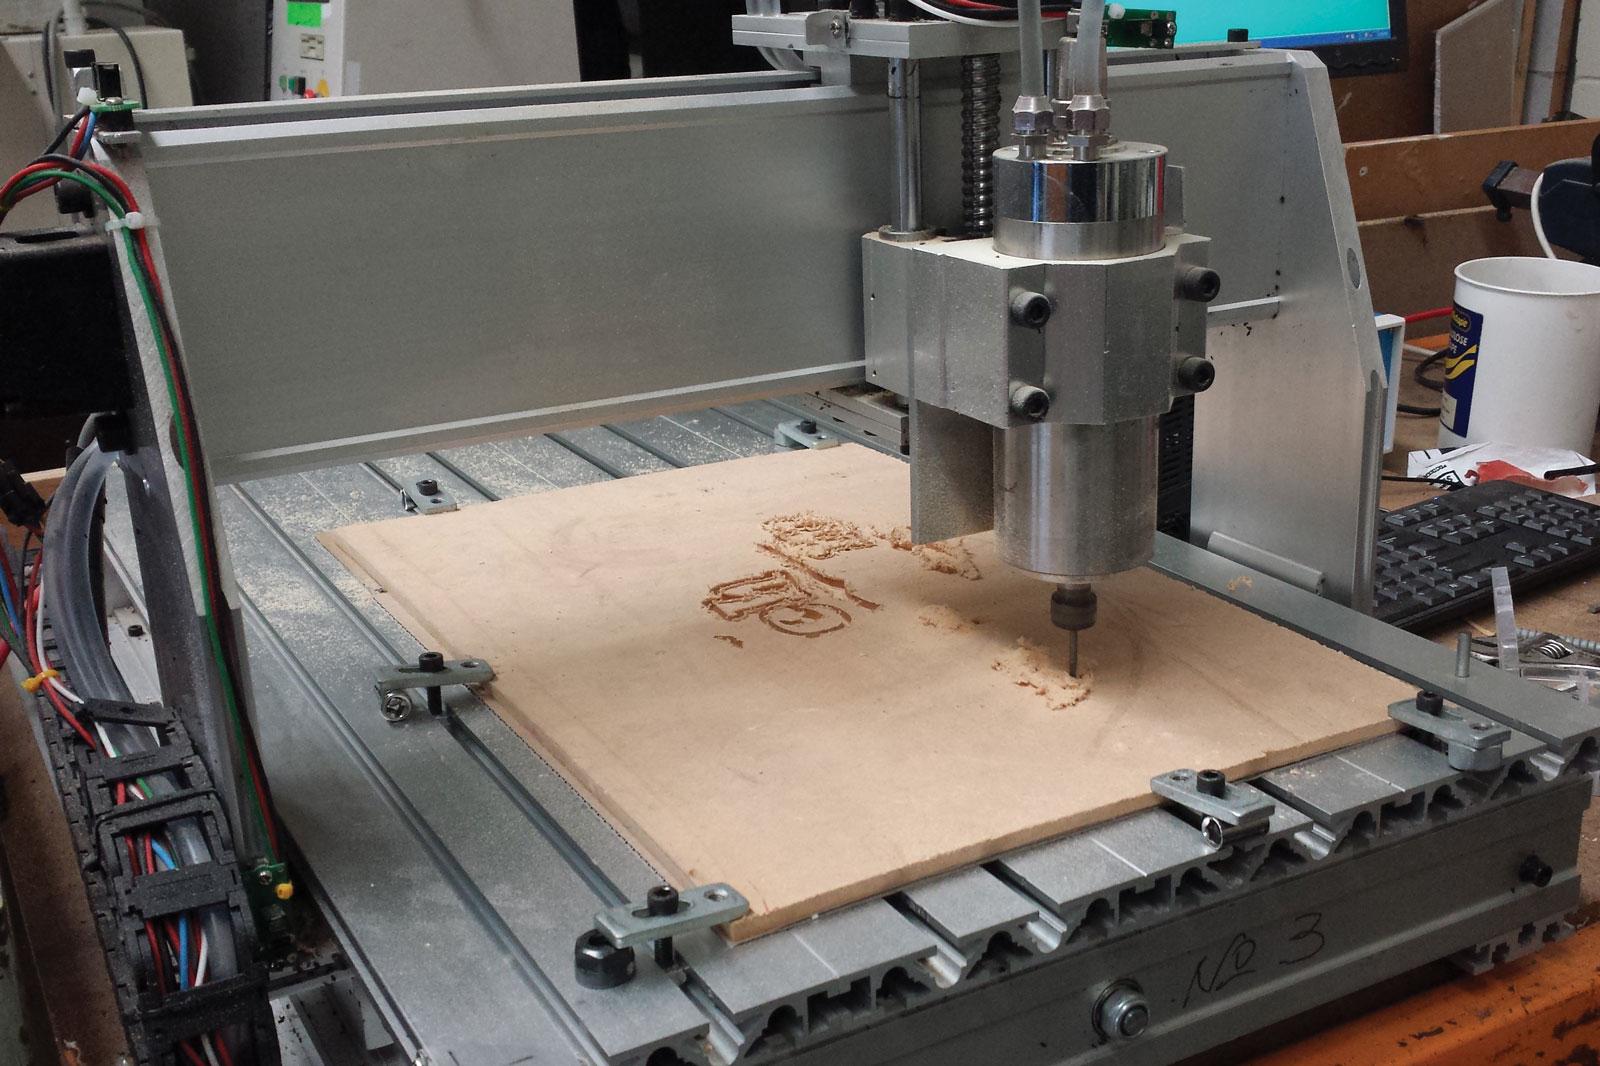 Like many hobbyists, Ray has his own CNC machine for making all sorts of awesome things.